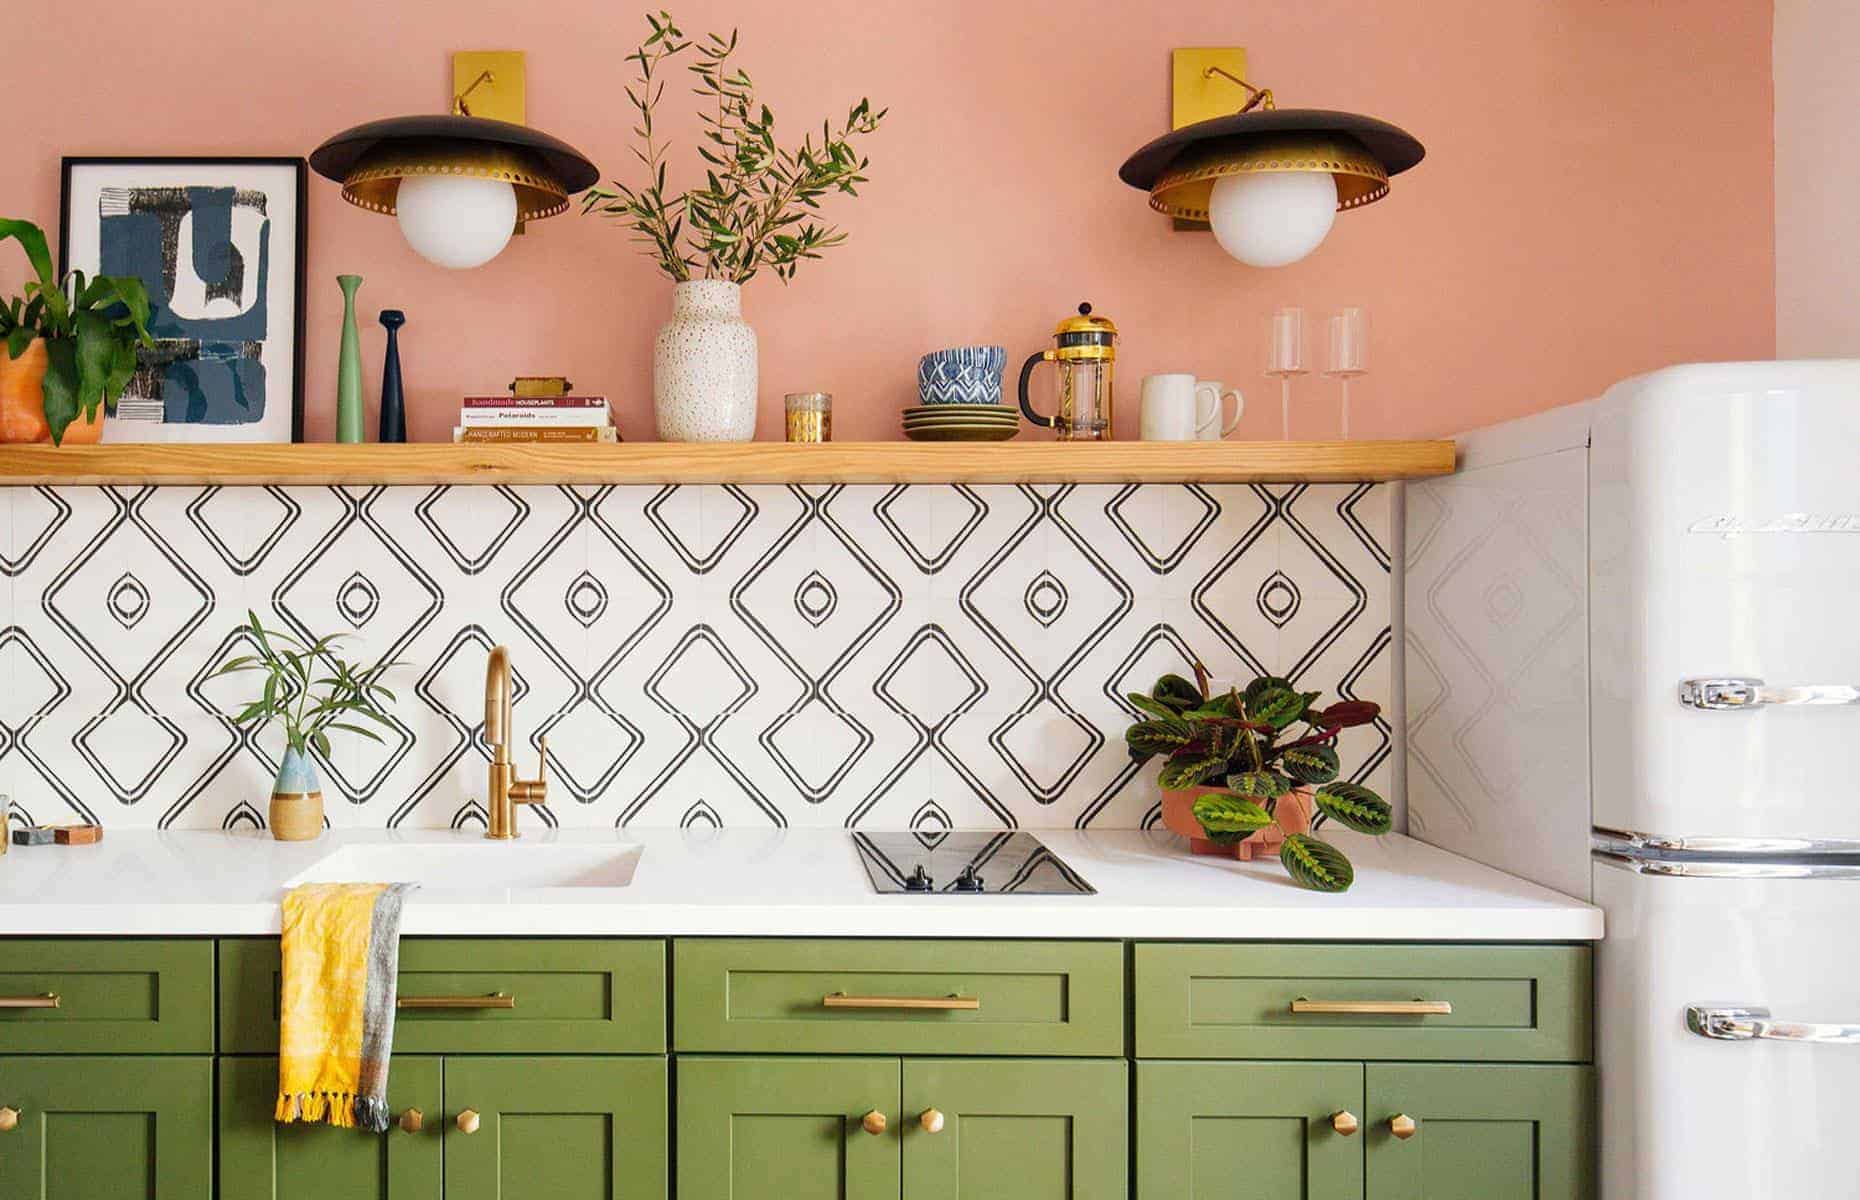 patel pink walls with black and white geometric tiles and green cabinets in the kitchen